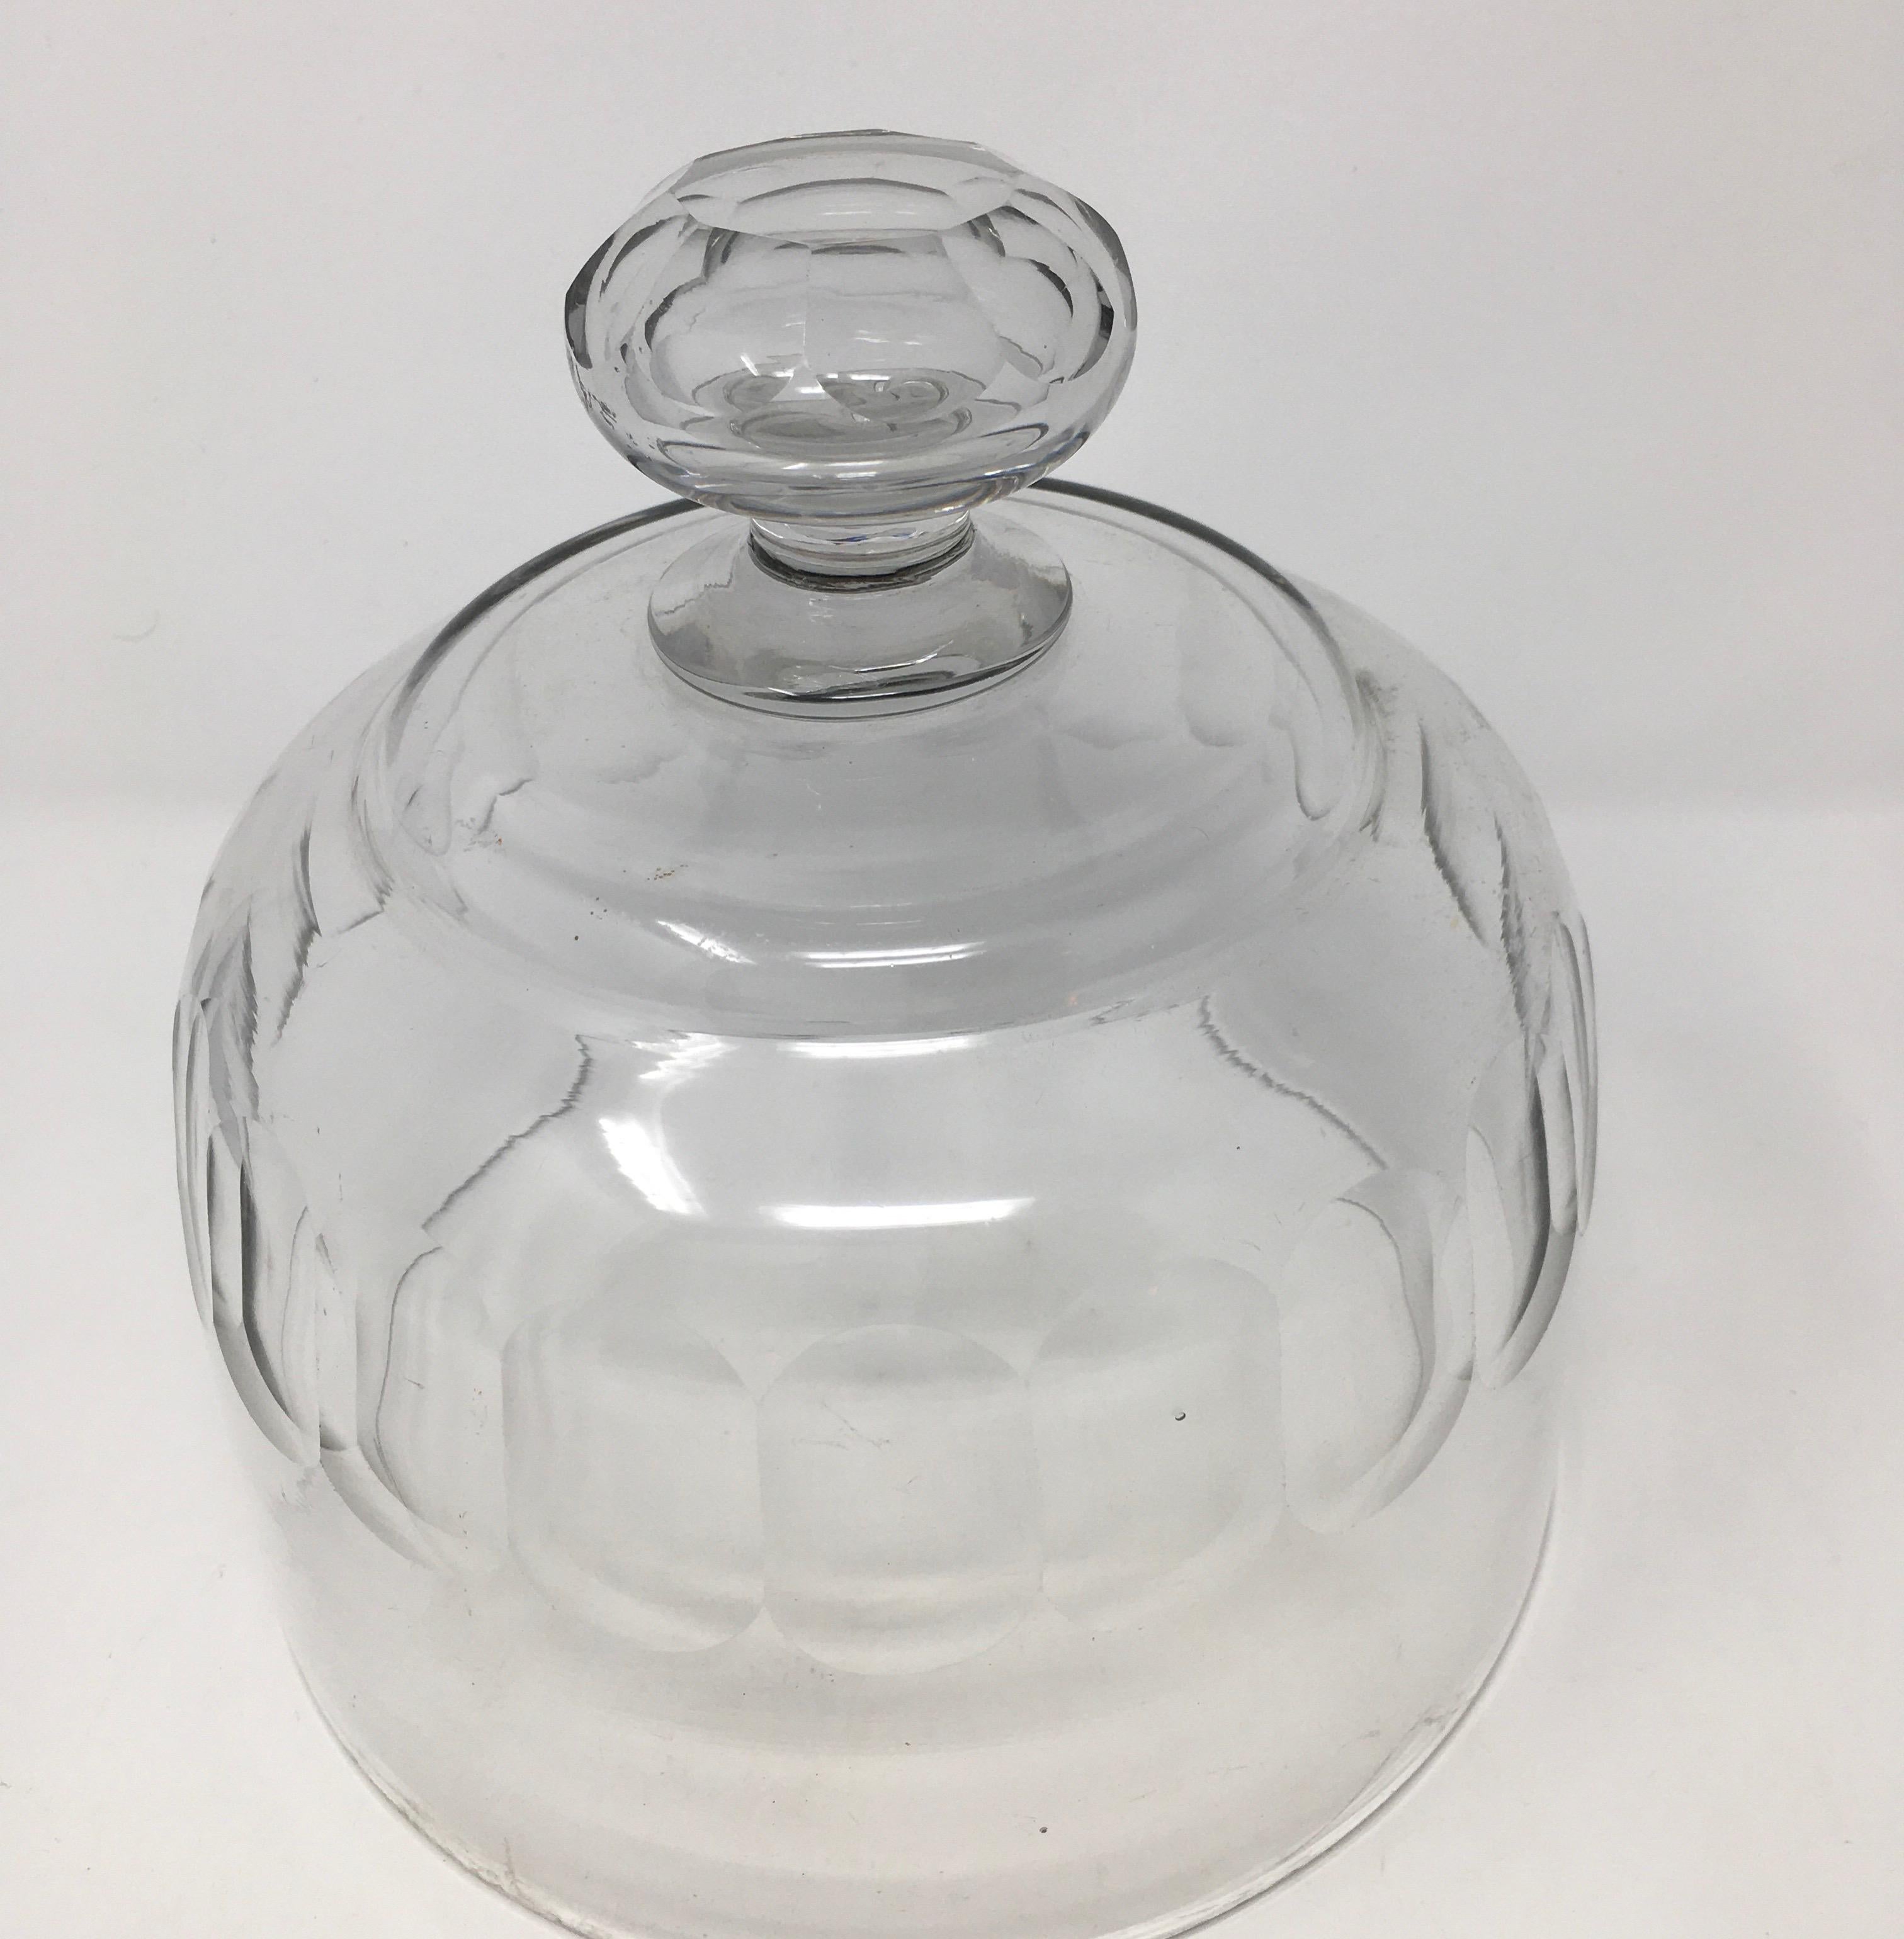 French antique Patisserie glass dome cloche with a solid glass knob handle. Smooth and polished glass, these were used in French Cheese Shop's to cover and display cheeses.